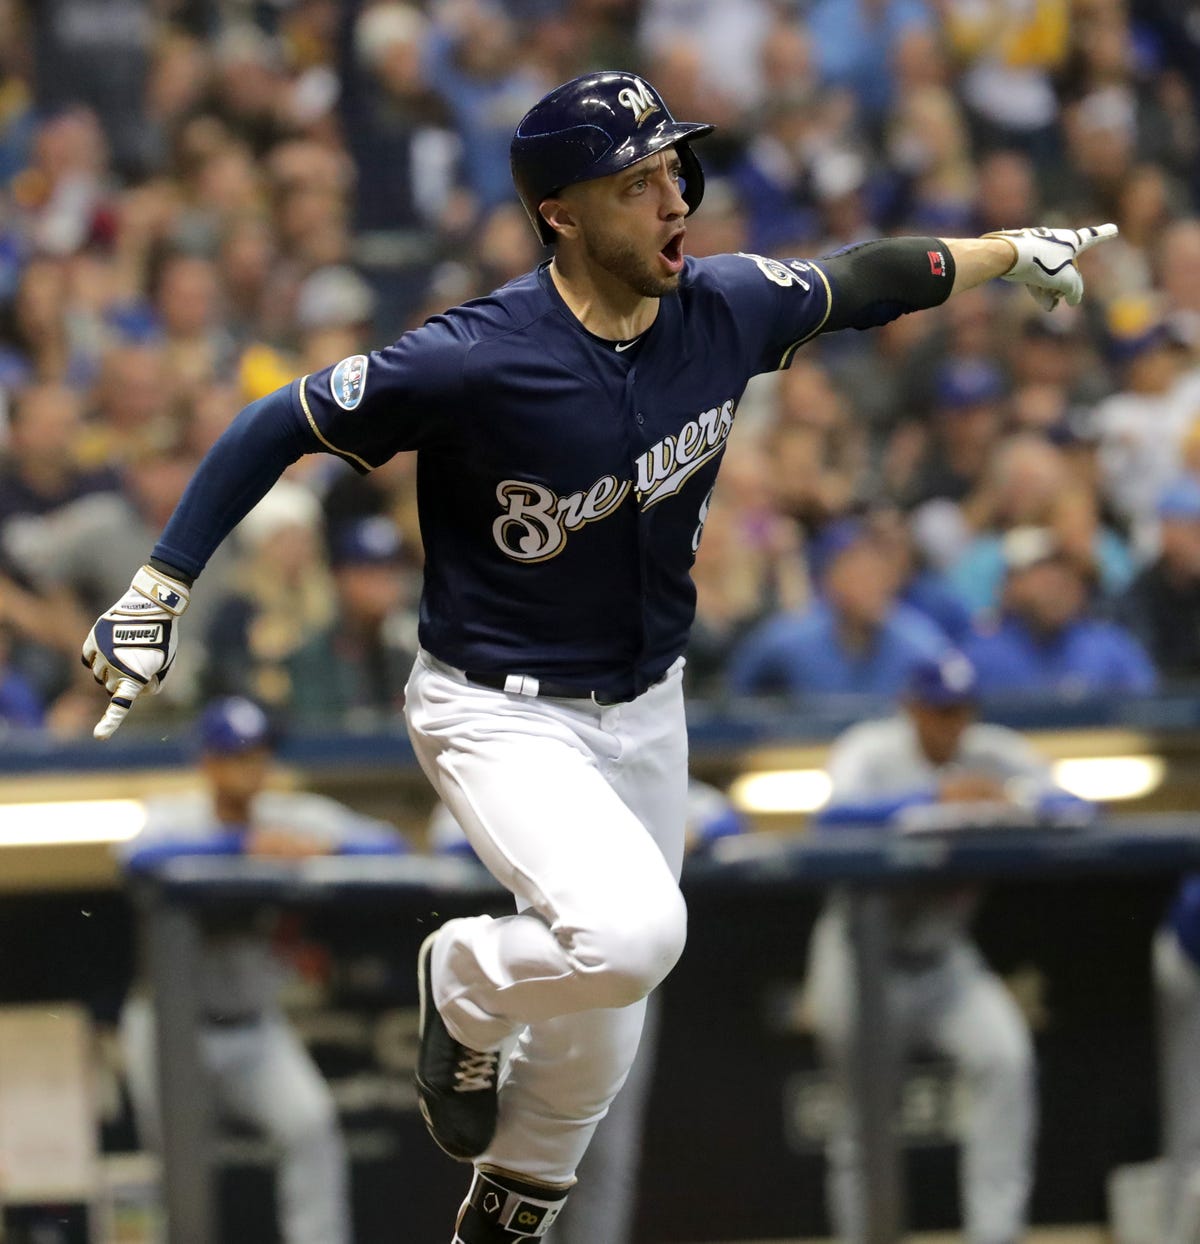 Studiet arsenal program Ryan Braun announces his retirement after 14 years with the Brewers